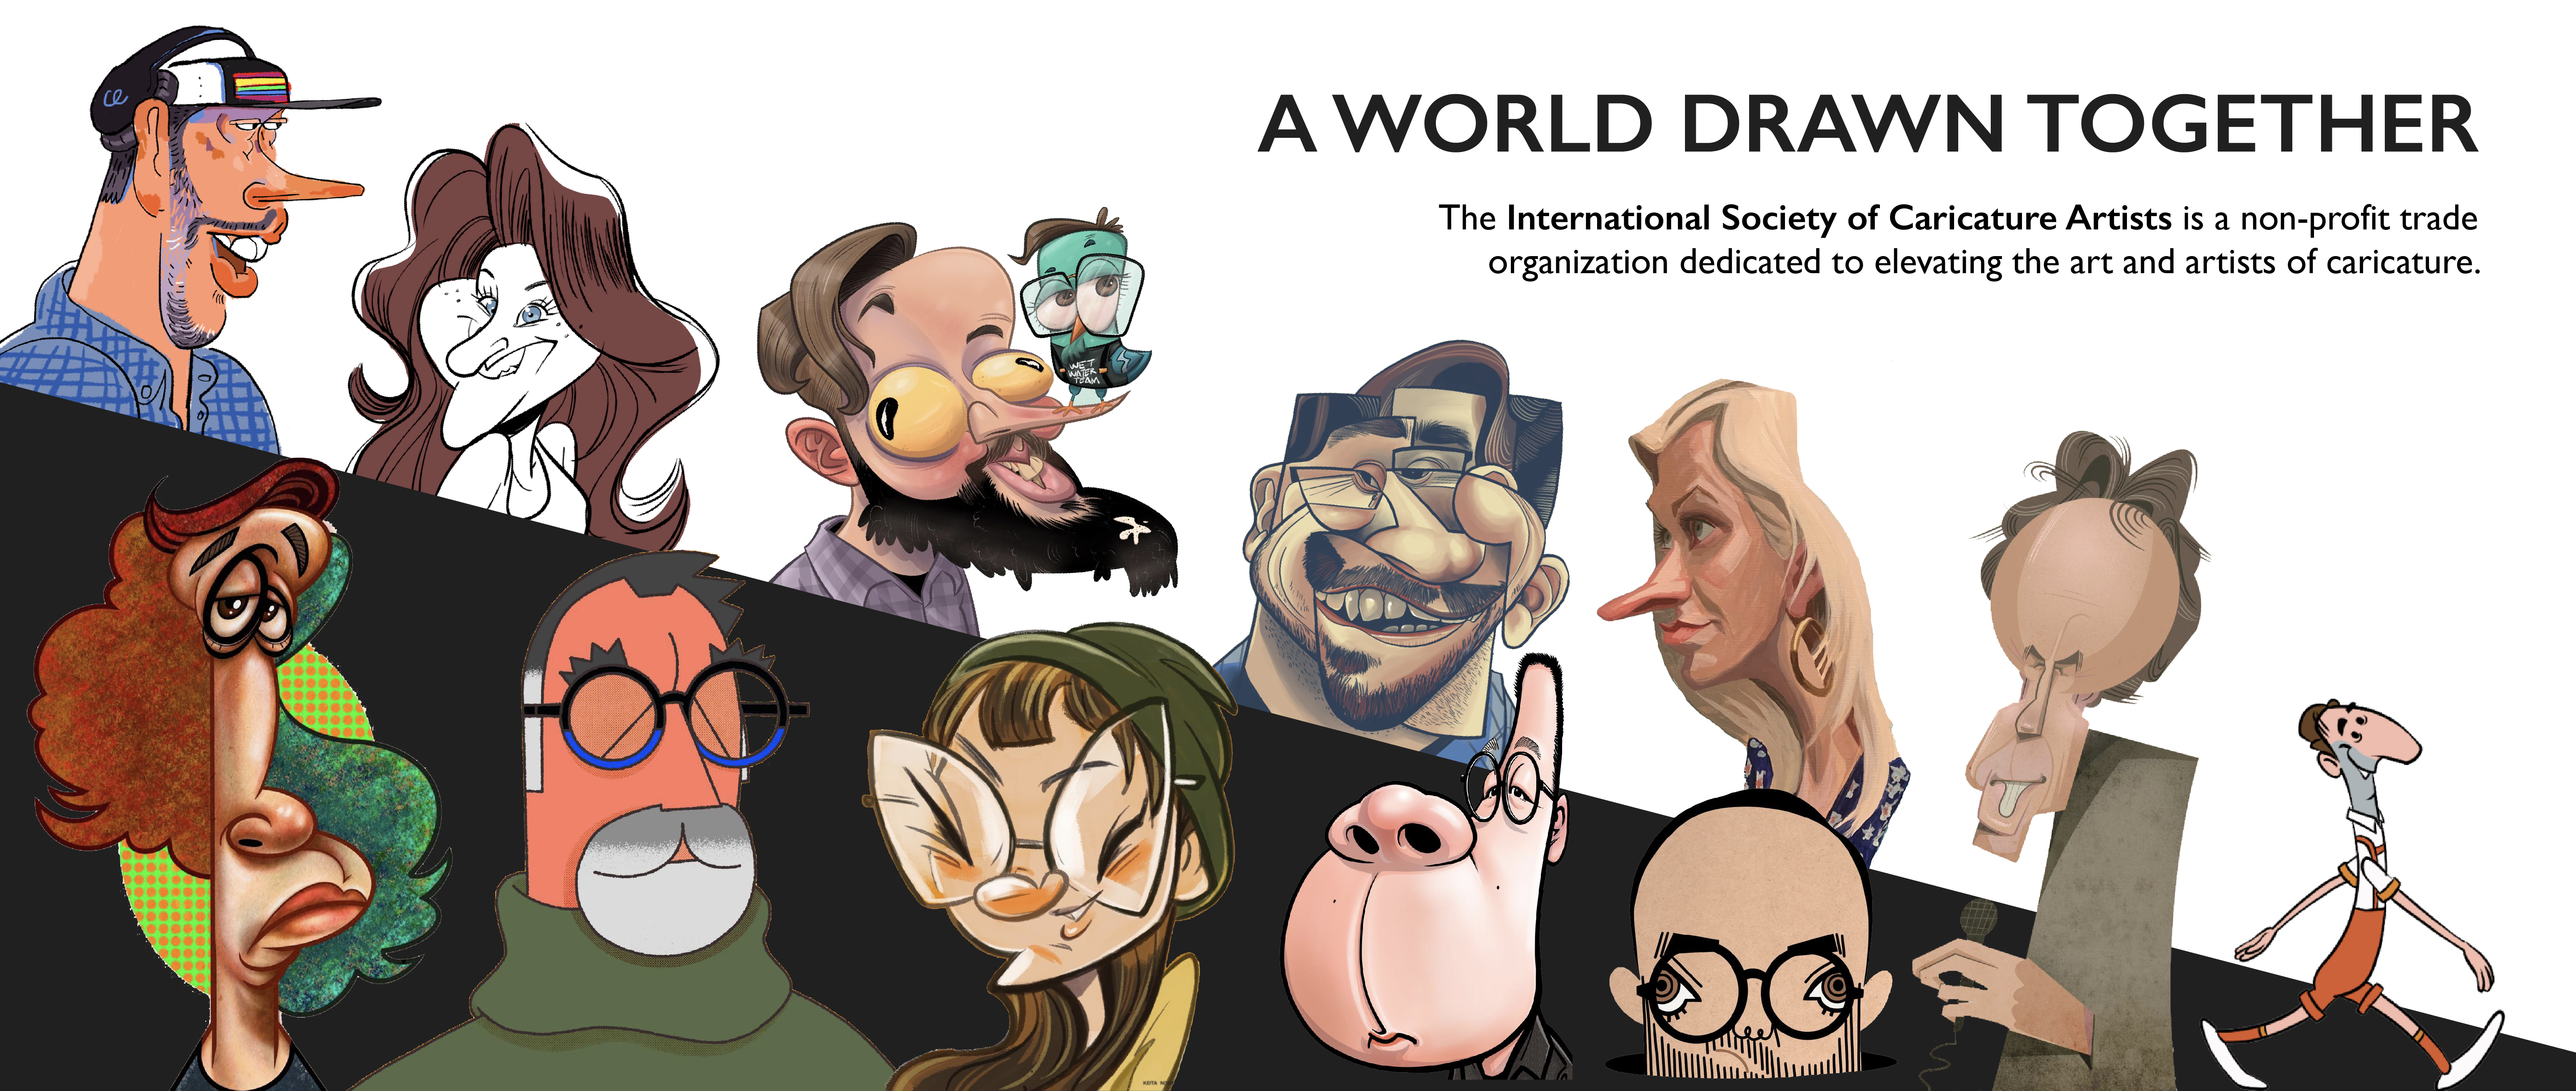 International Society of Caricature Artists - Home